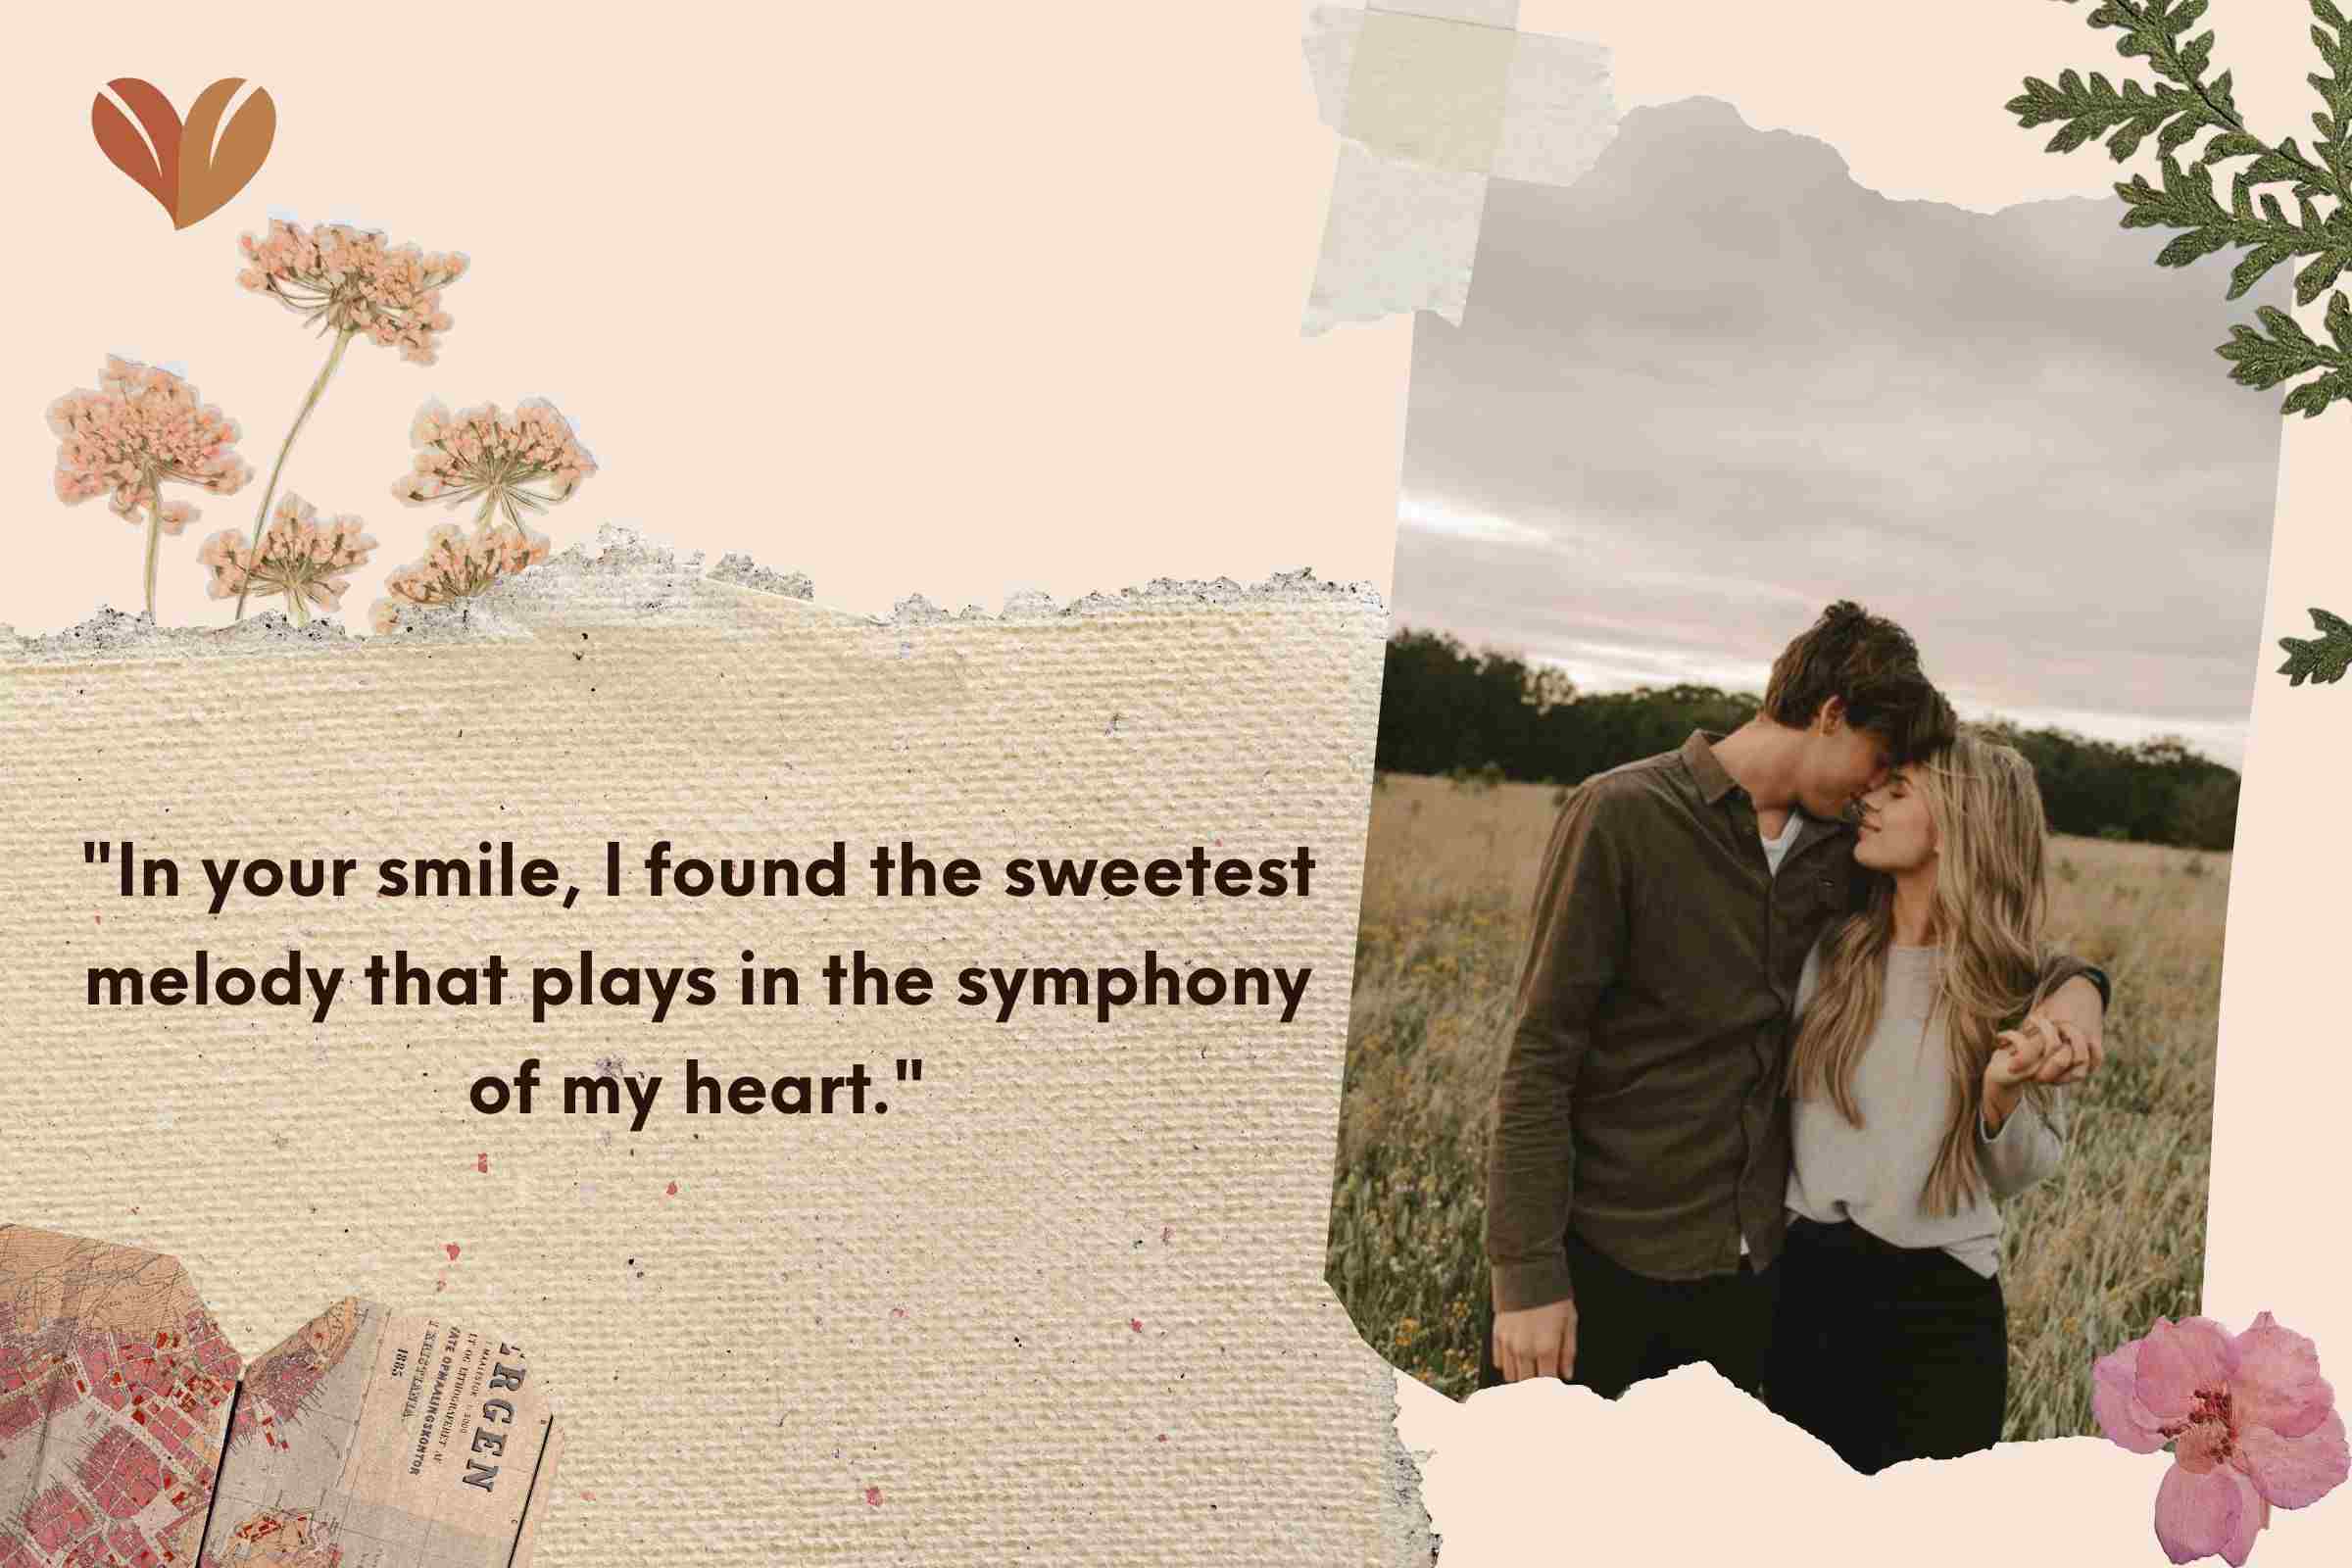 In your smile, I found the sweetest melody that plays in the symphony of my heart.